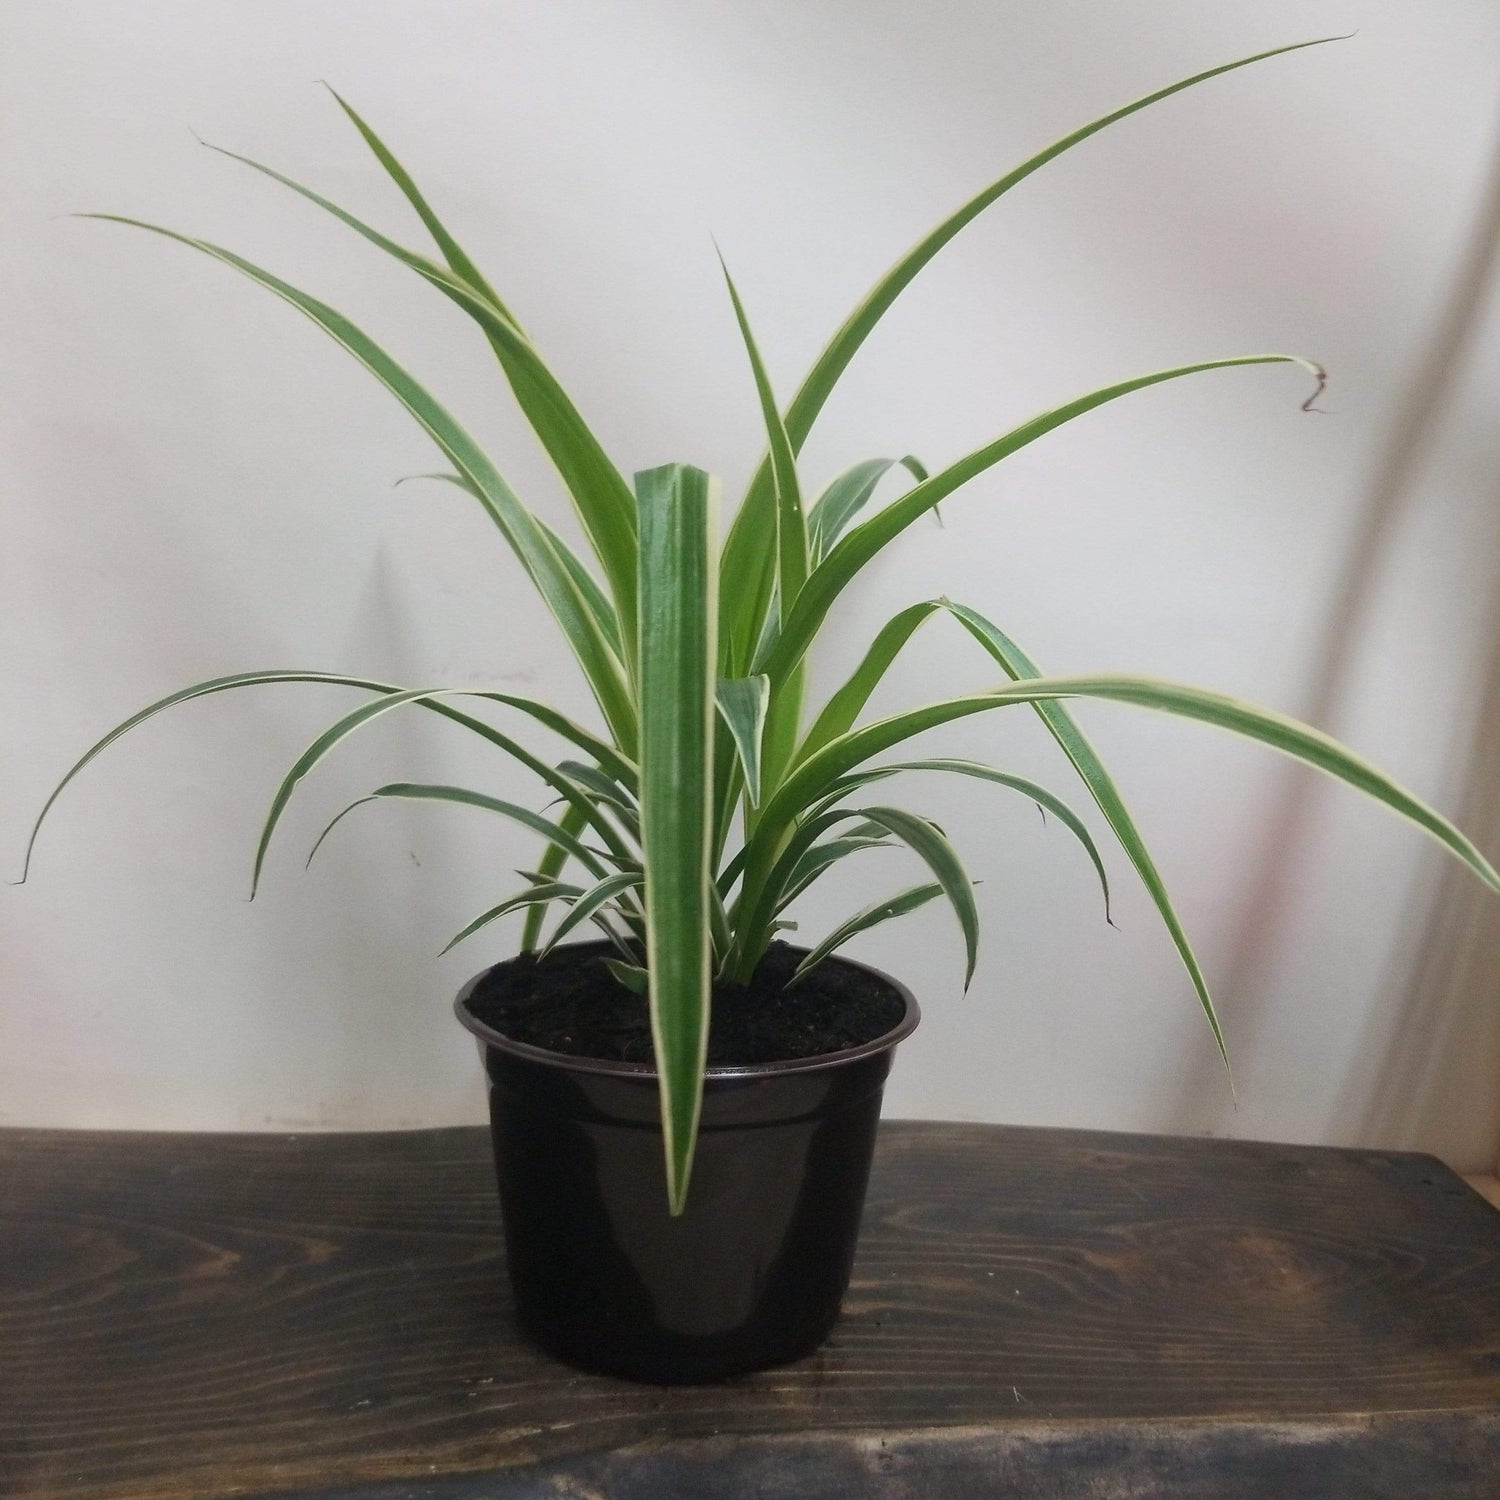 Urban Sprouts Plant 6" in nursery pot Spider Plant 'Reverse Variegated'